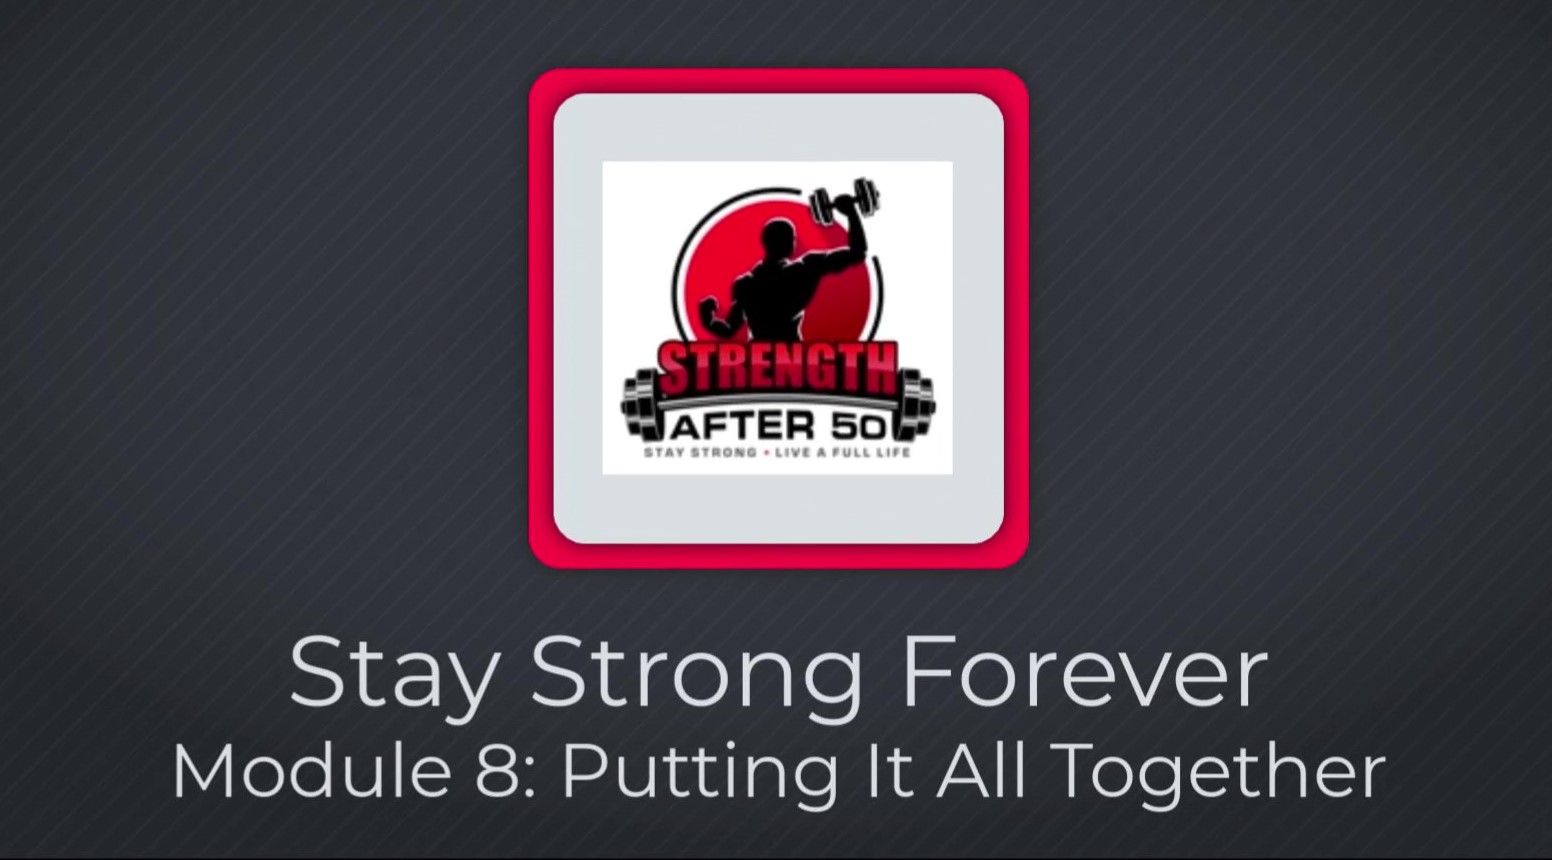 Stay Strong Forever E-Course Module 8